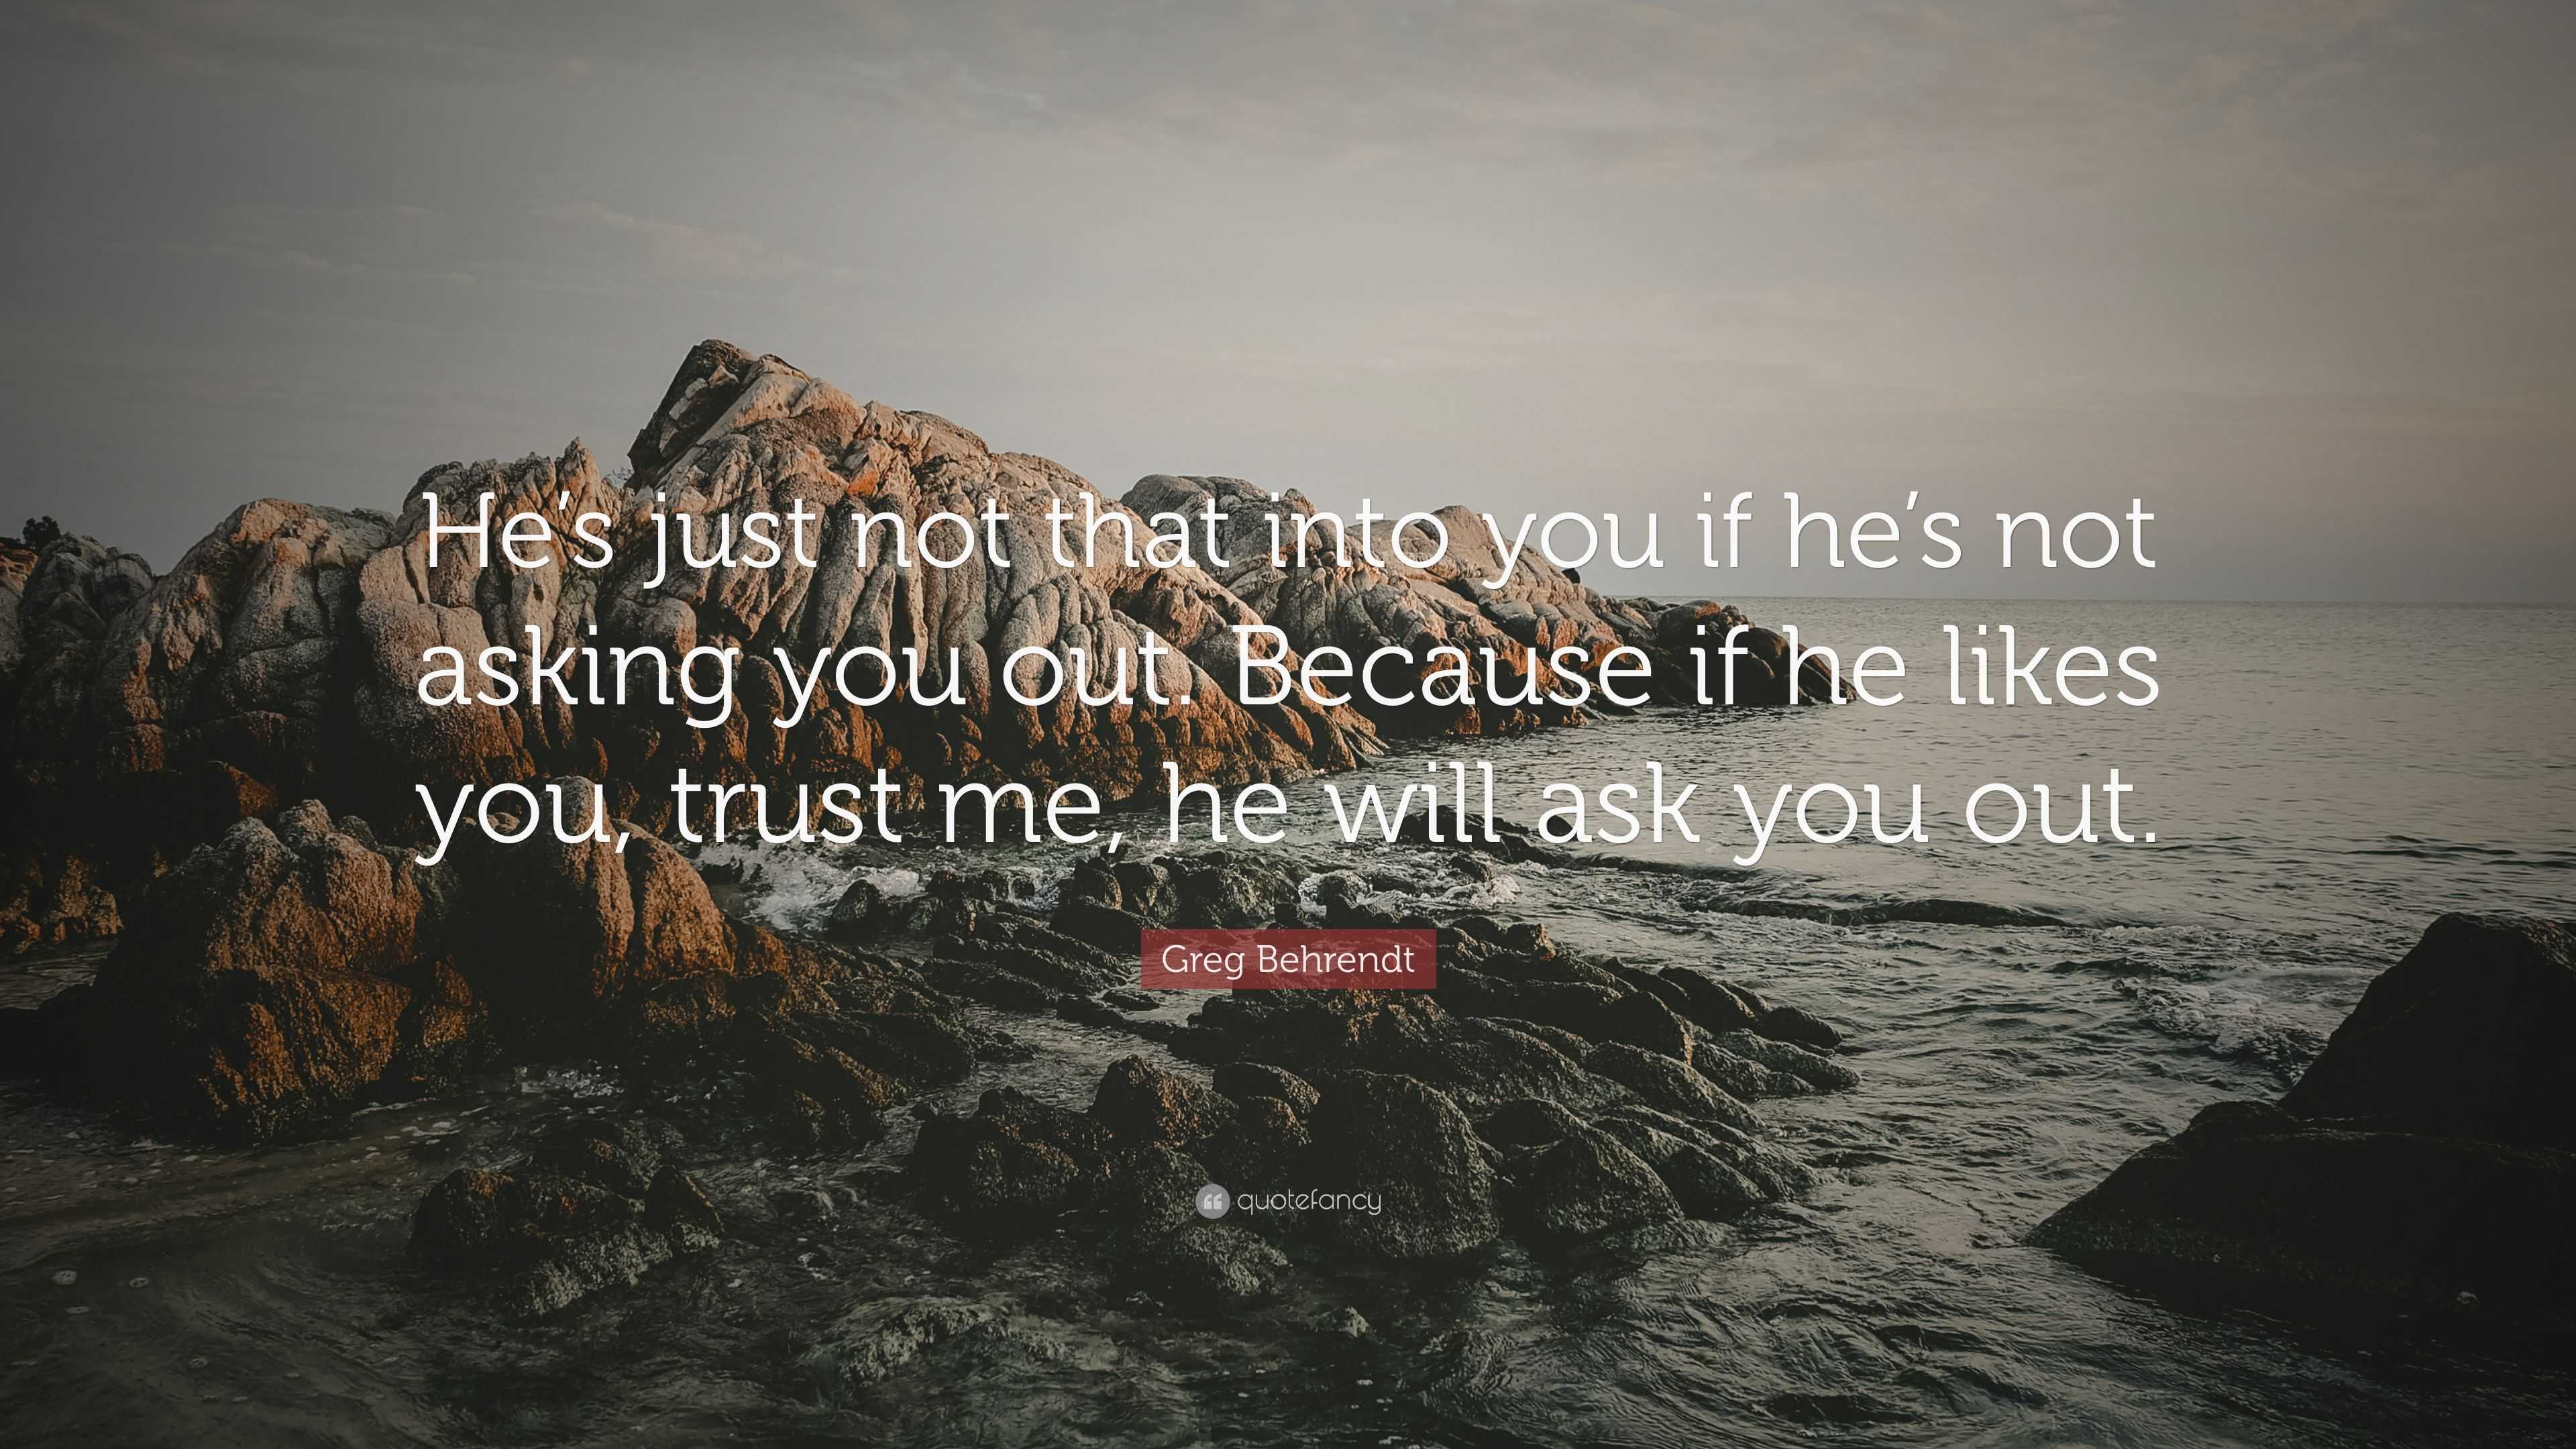 Greg Behrendt Quote: “He’s just not that into you if he’s not asking ...